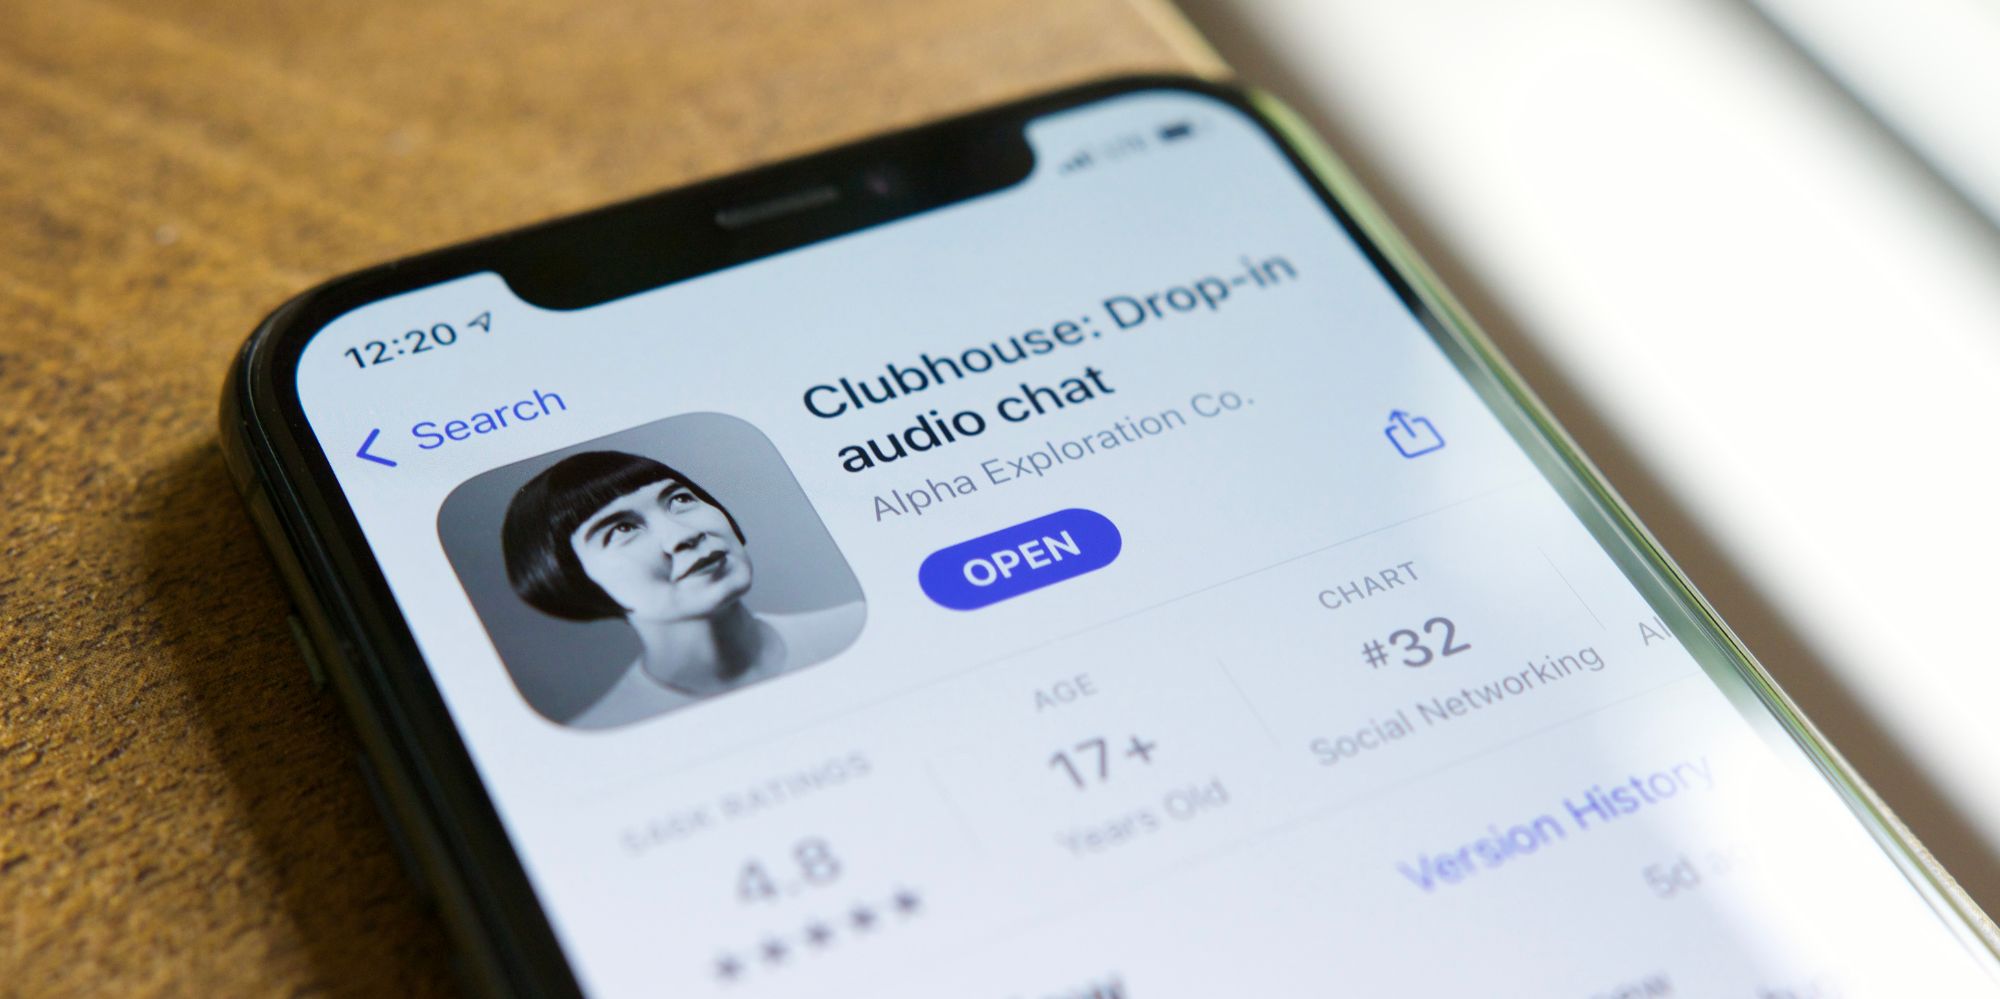 Clubhouse app in the App Store on an iPhone